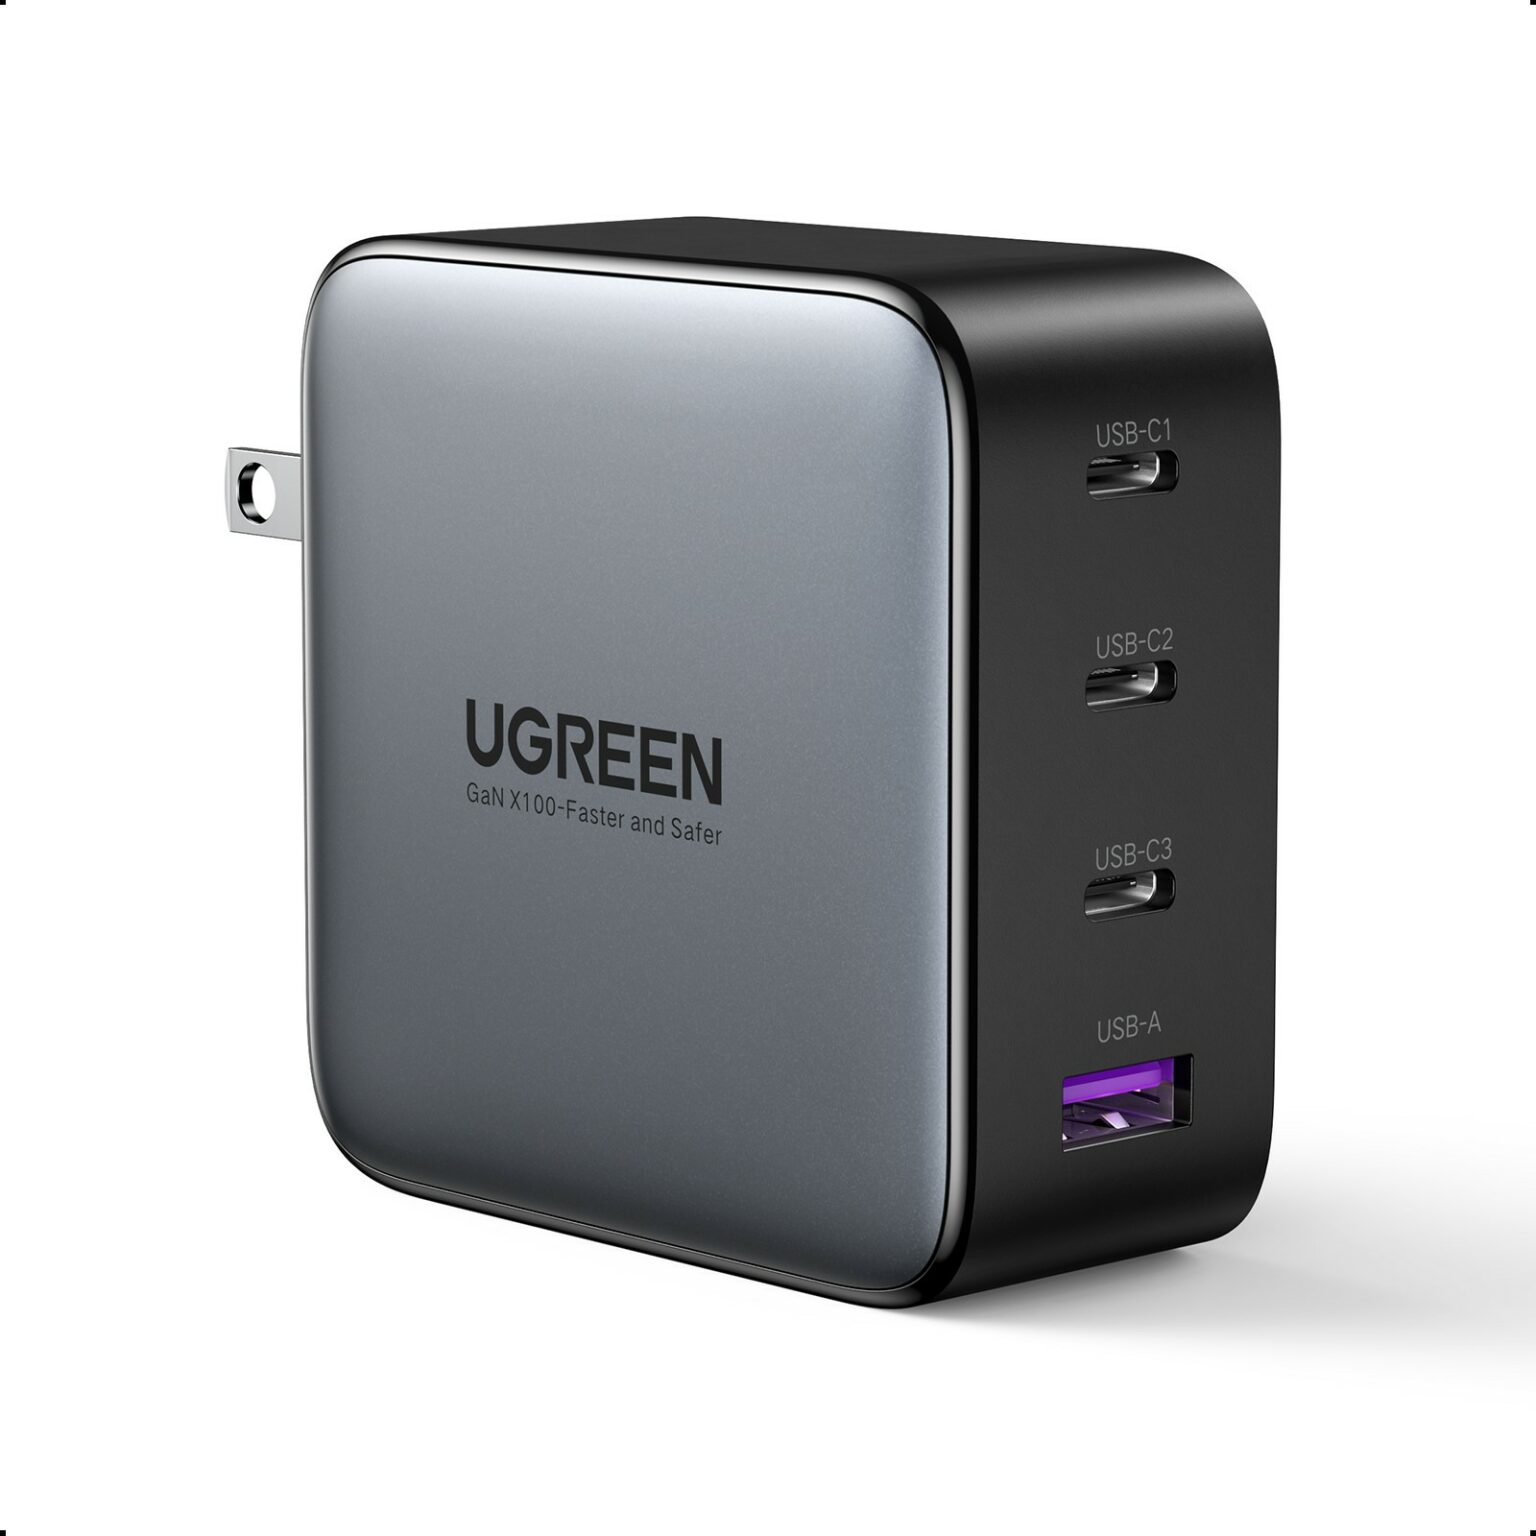 Ugreen 100W USB C Multiport Charger: Three USB-C ports, a USB-A port and 100 watts of power mean you can charge multiple devices at once.